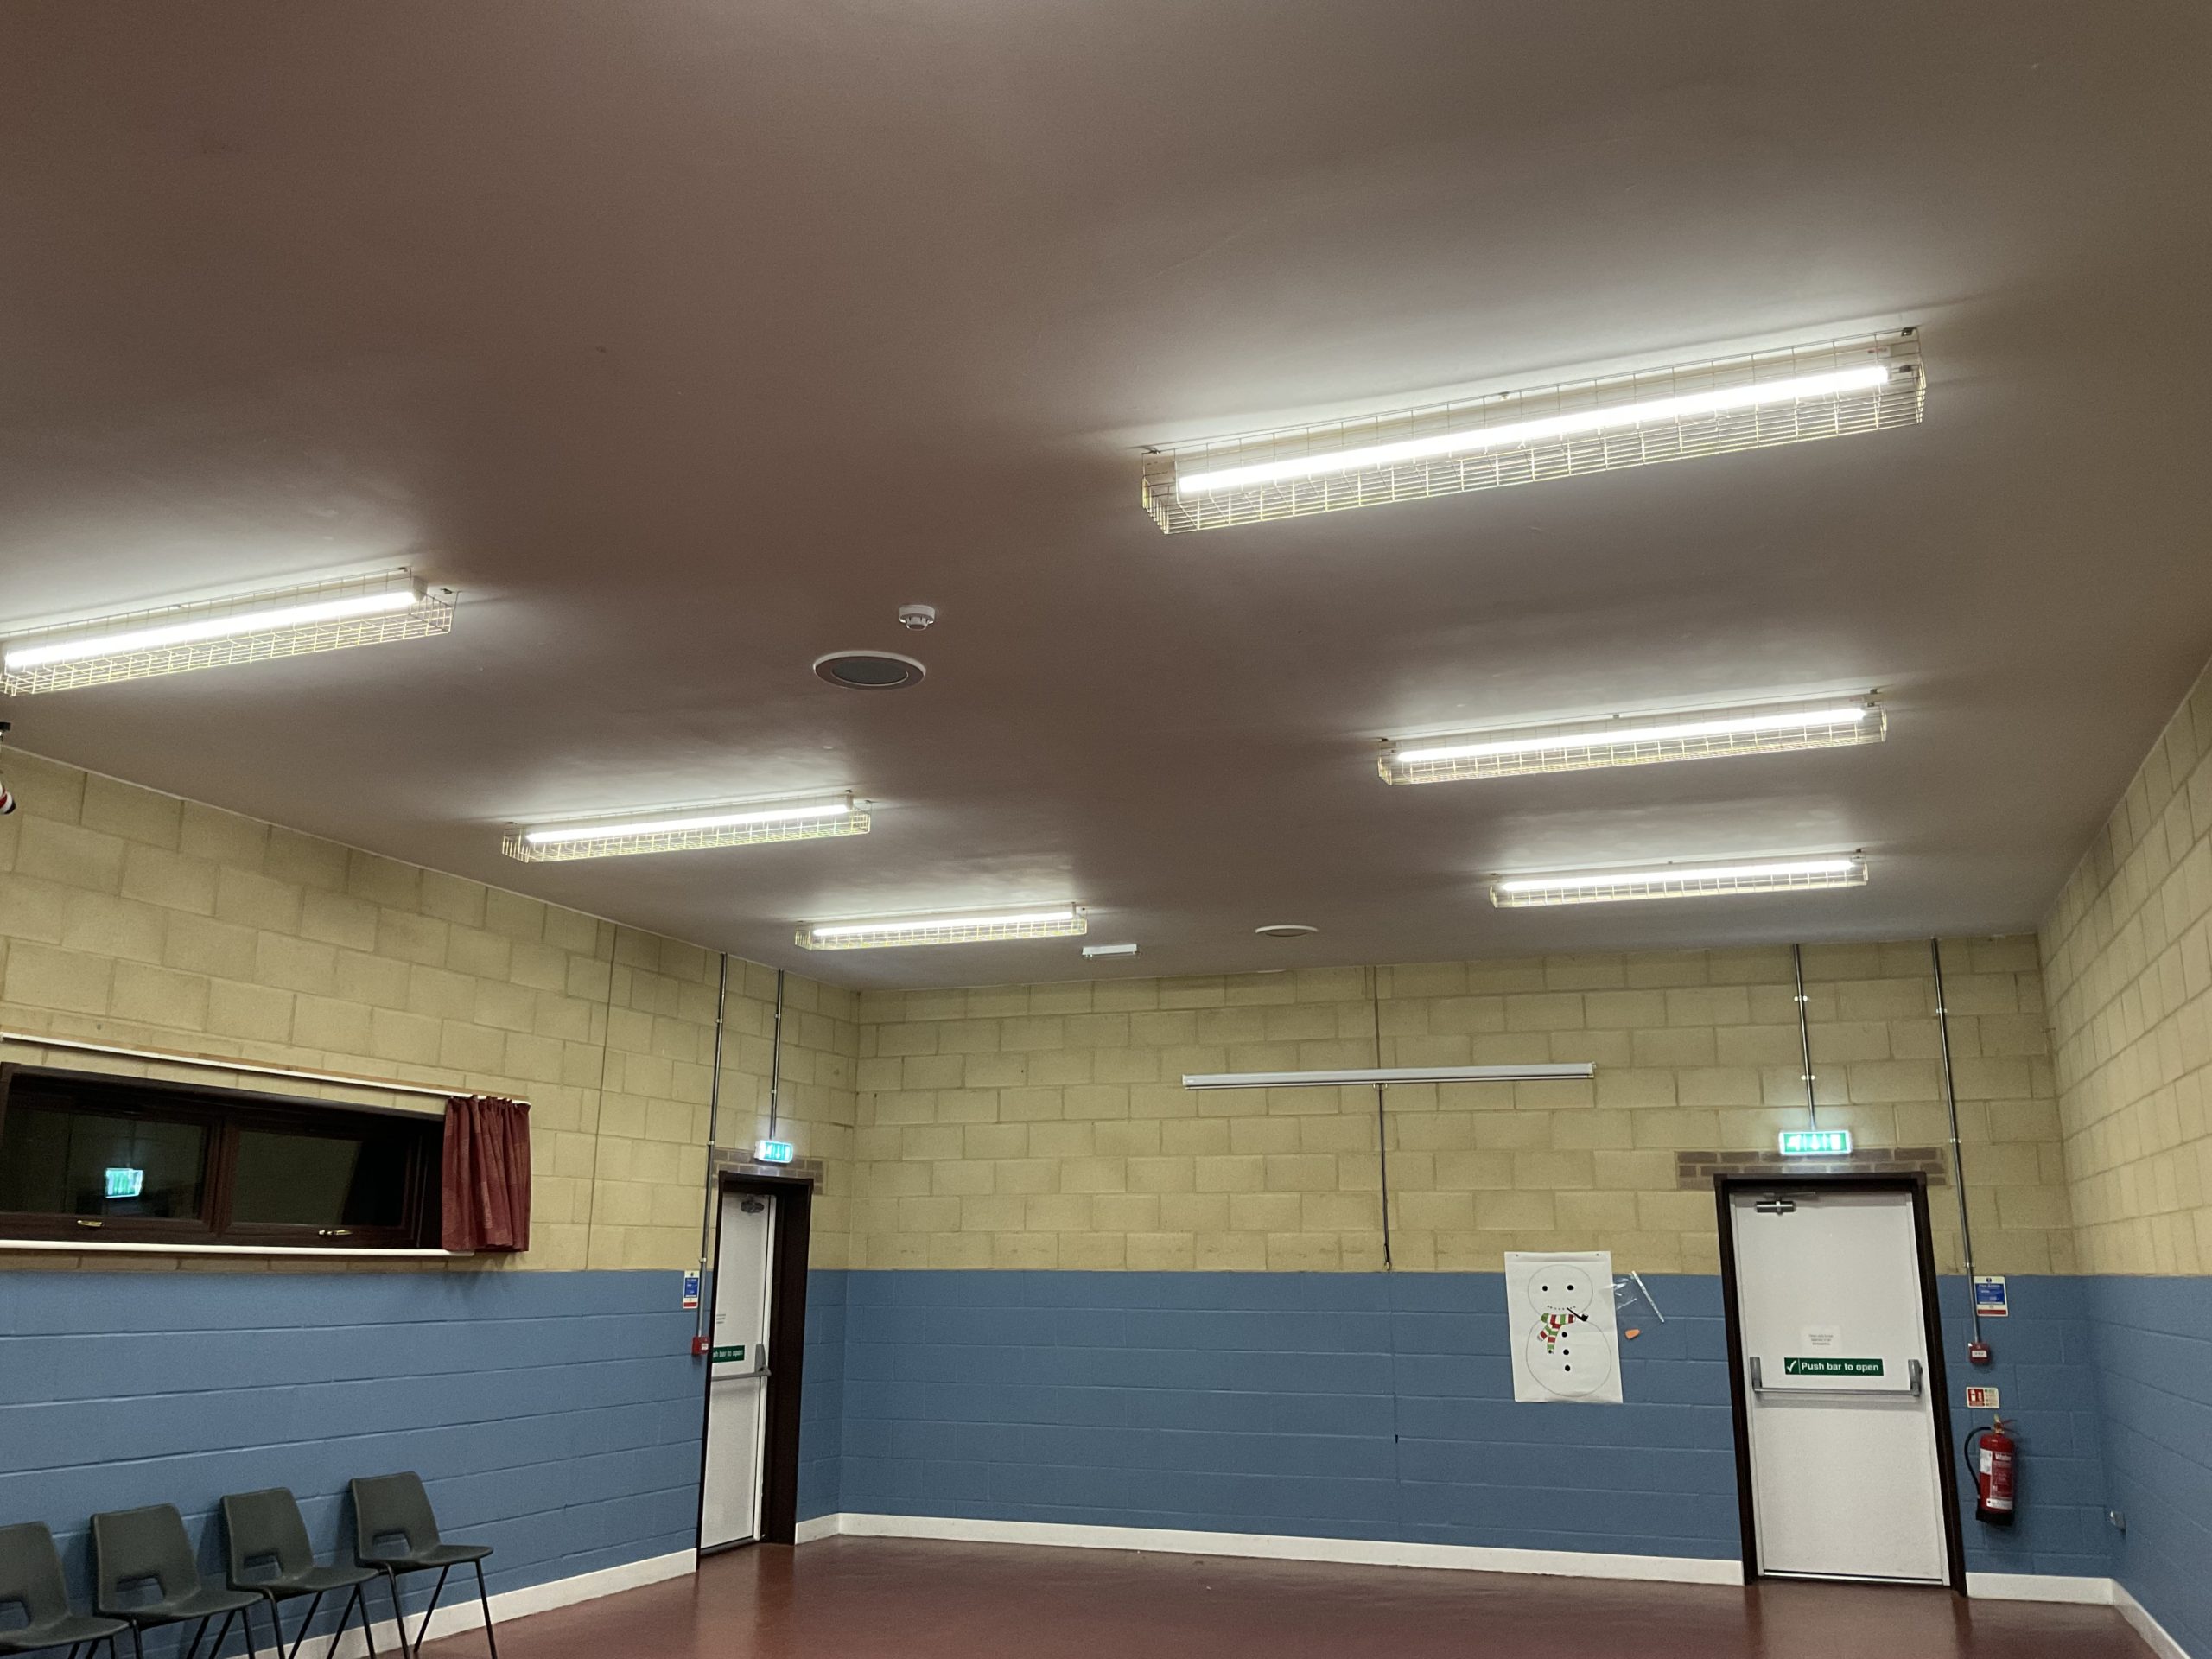 The new LED lighting installed within the main hall of our building